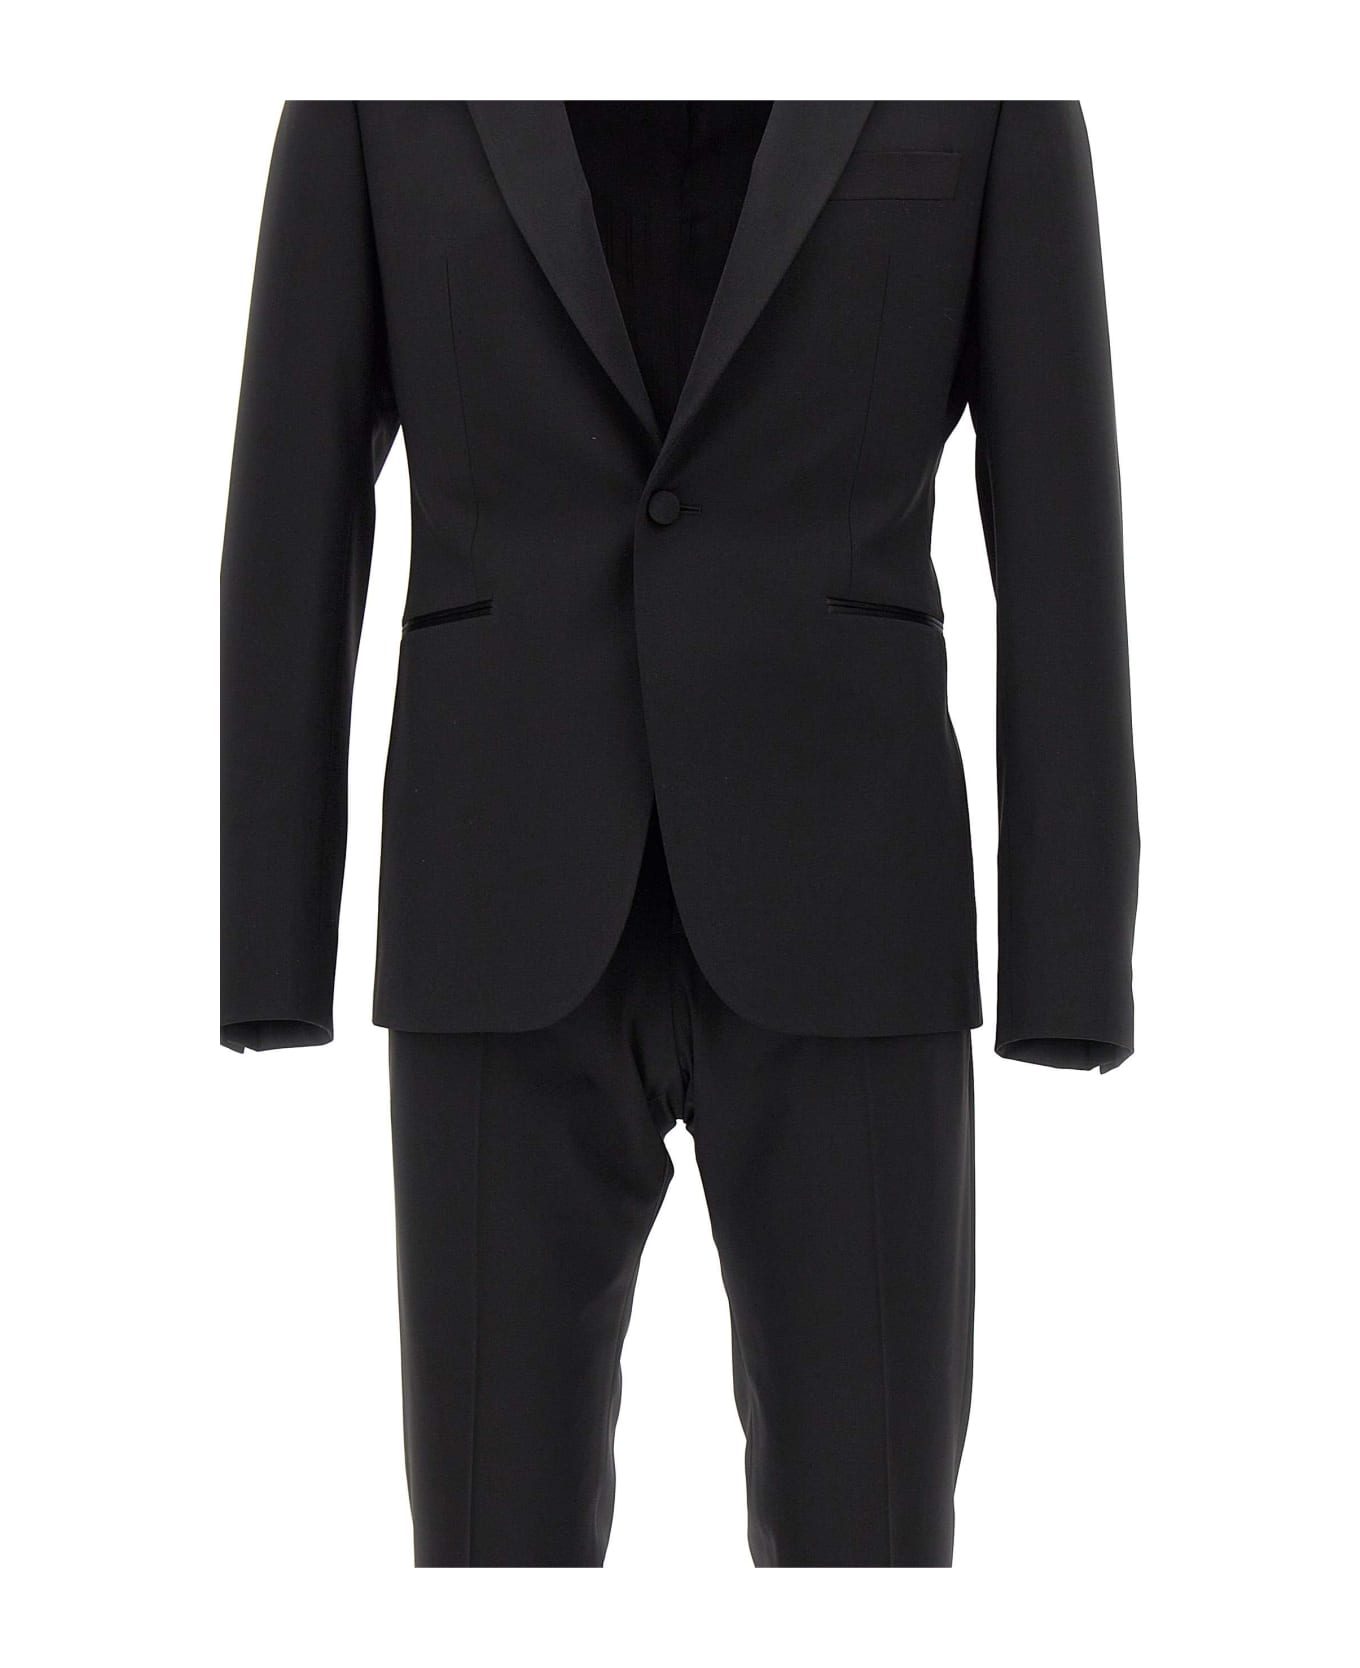 Emporio Armani Cool Wool Two-piece Formal Suit - BLACK